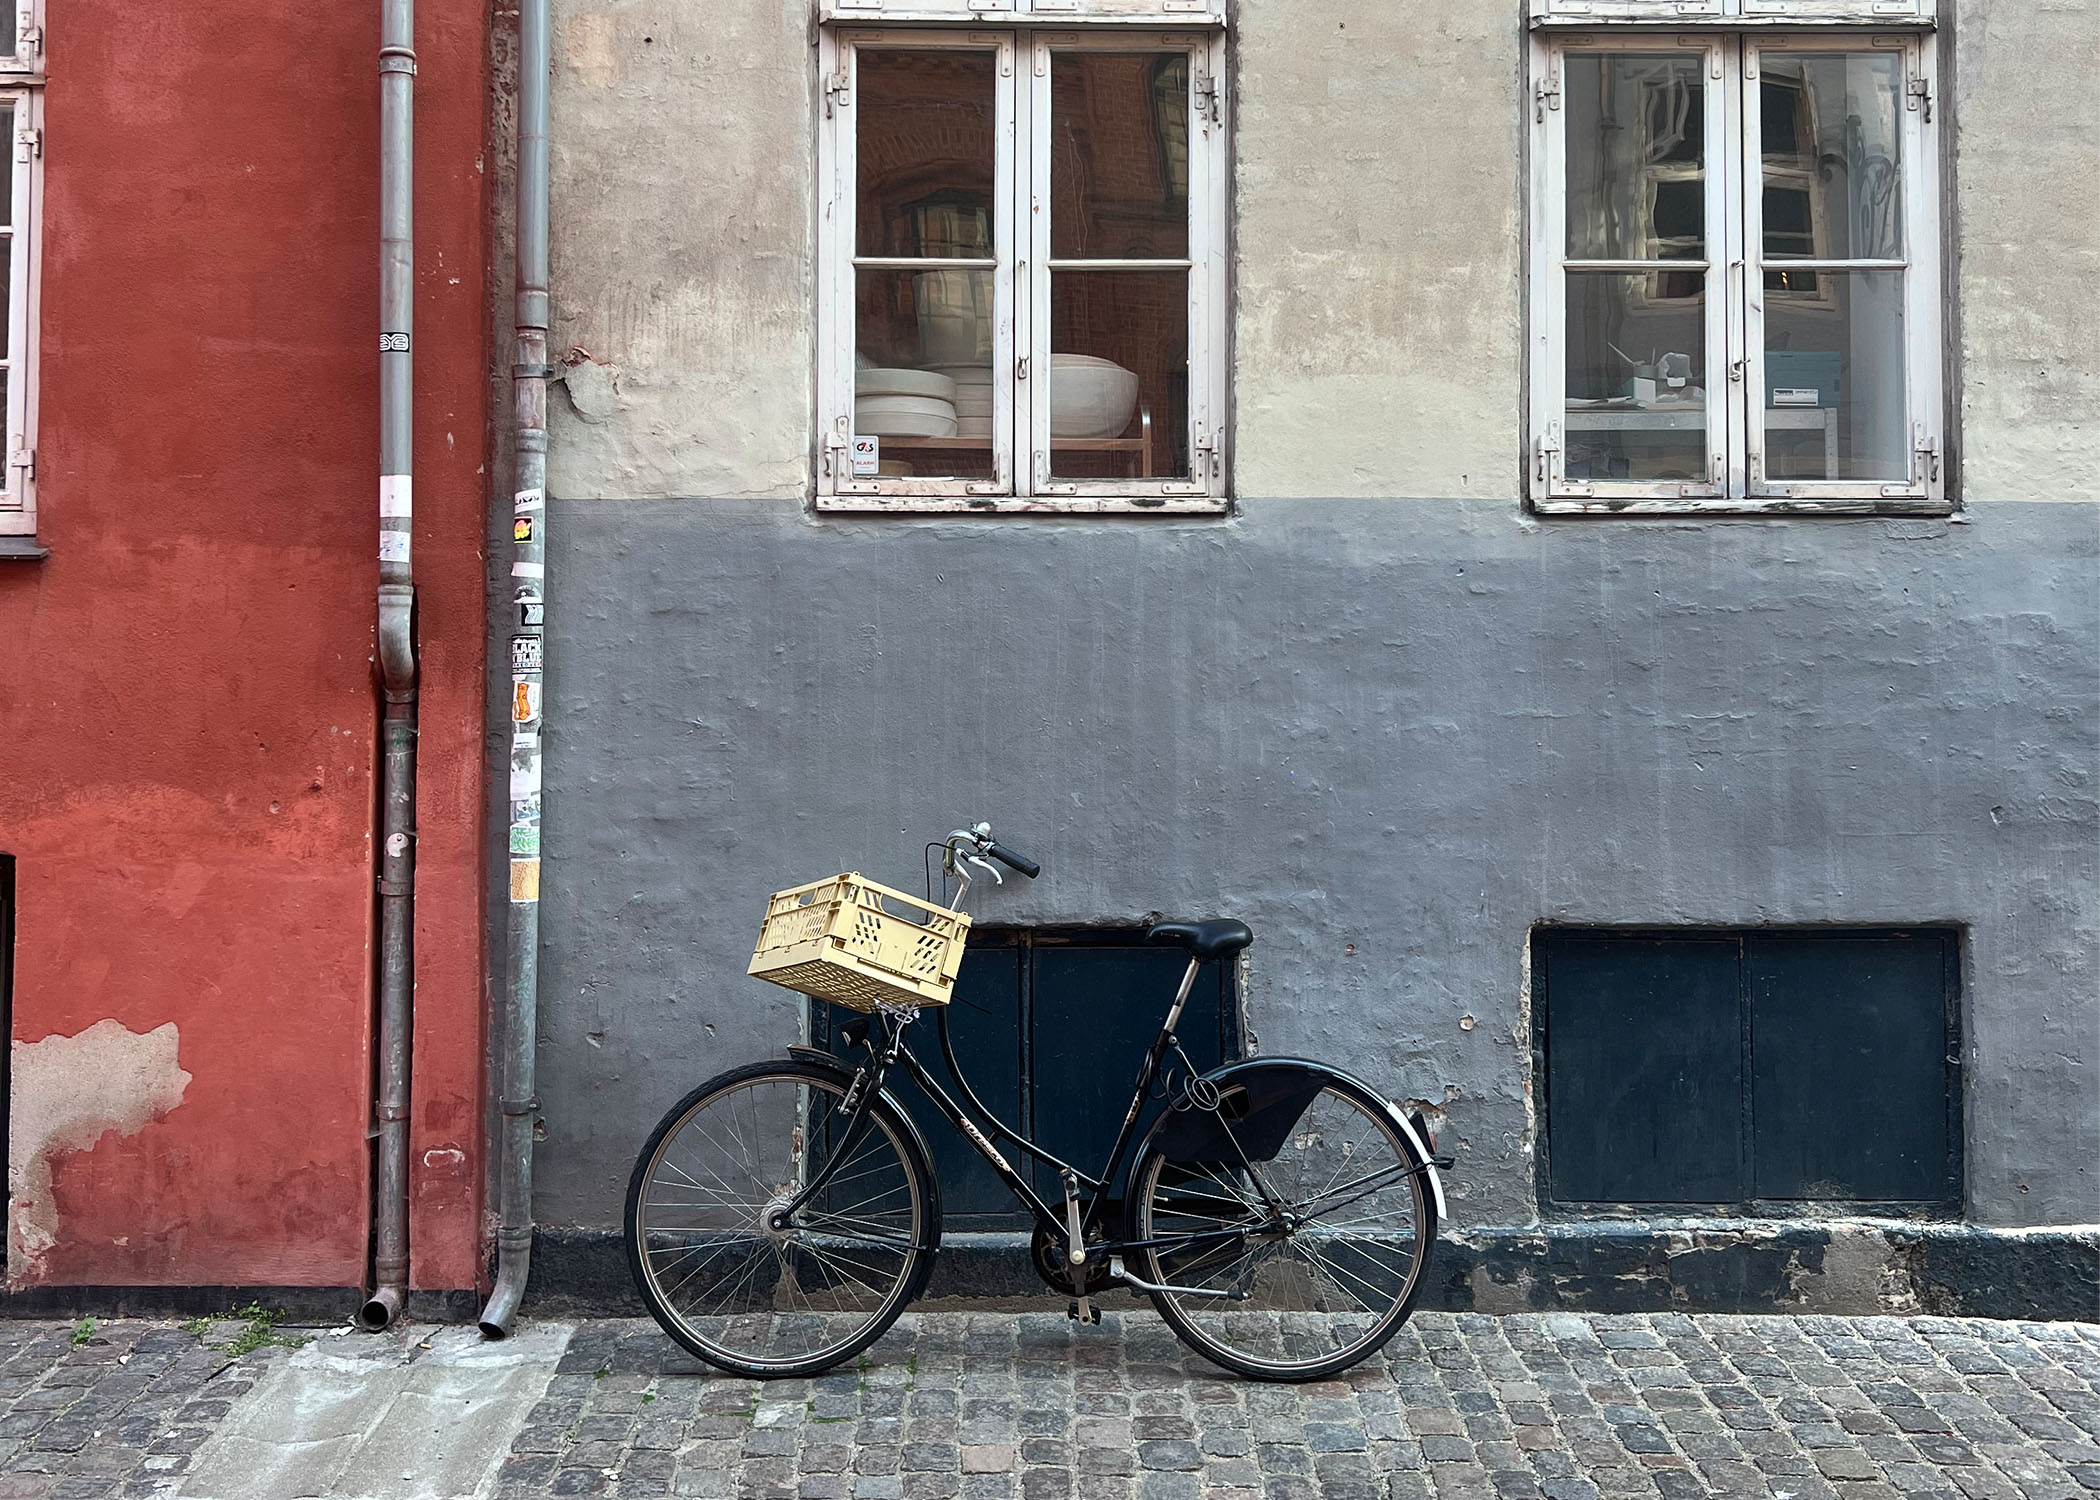 A bicycle rests against a red and grey building in Copenhagen, Denmark